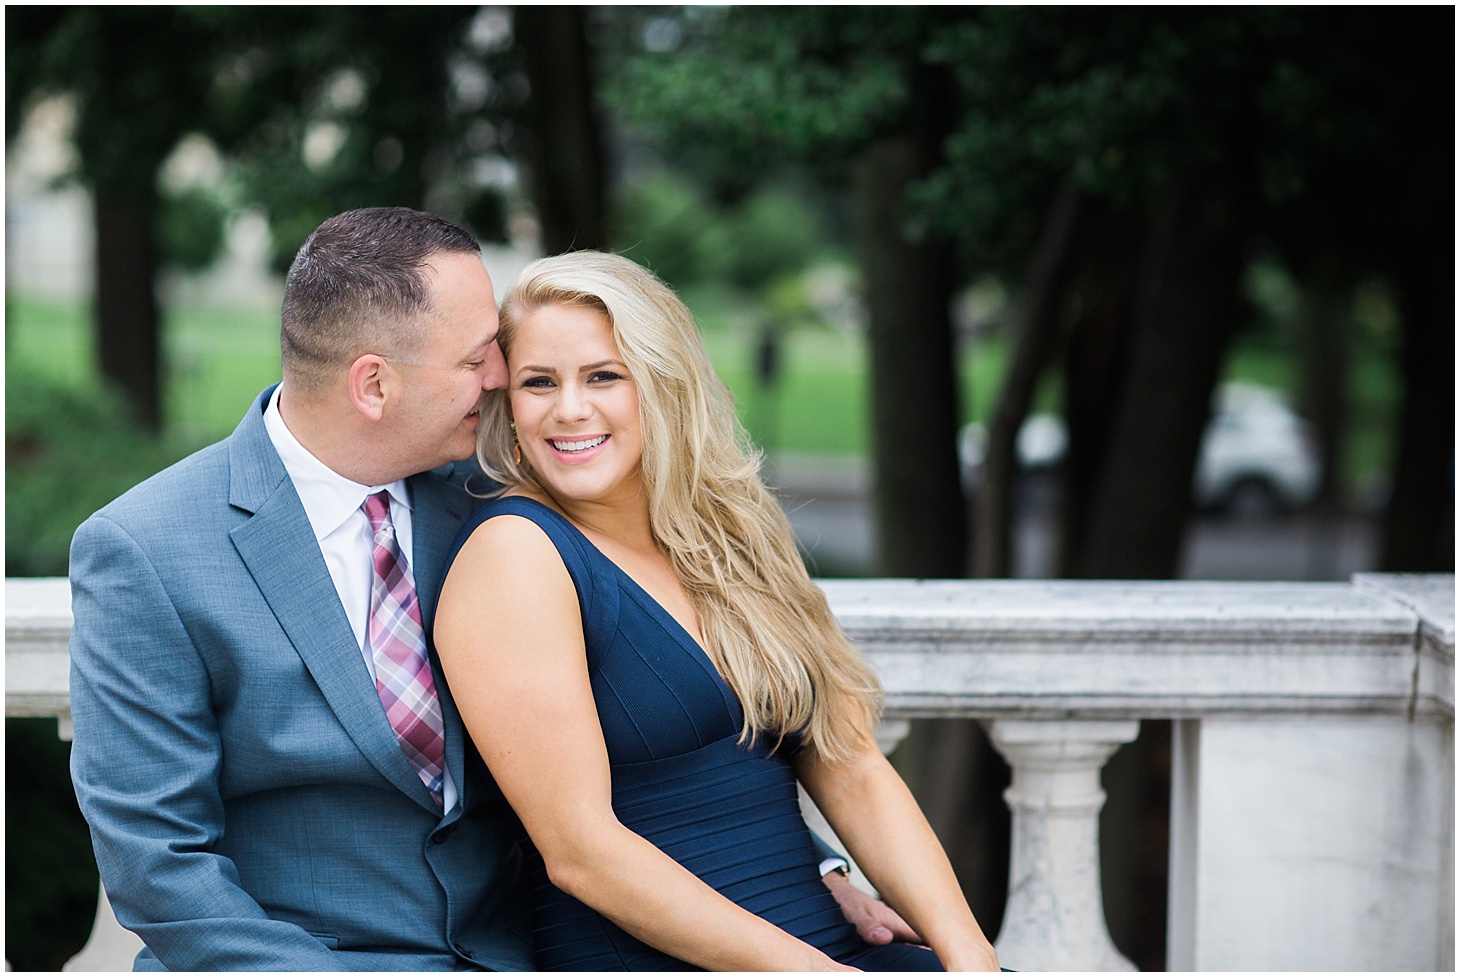 romantic-engagement-shoot-around-the-beautiful-d-c-monuments-by-sarah-bradshaw-photography_0012